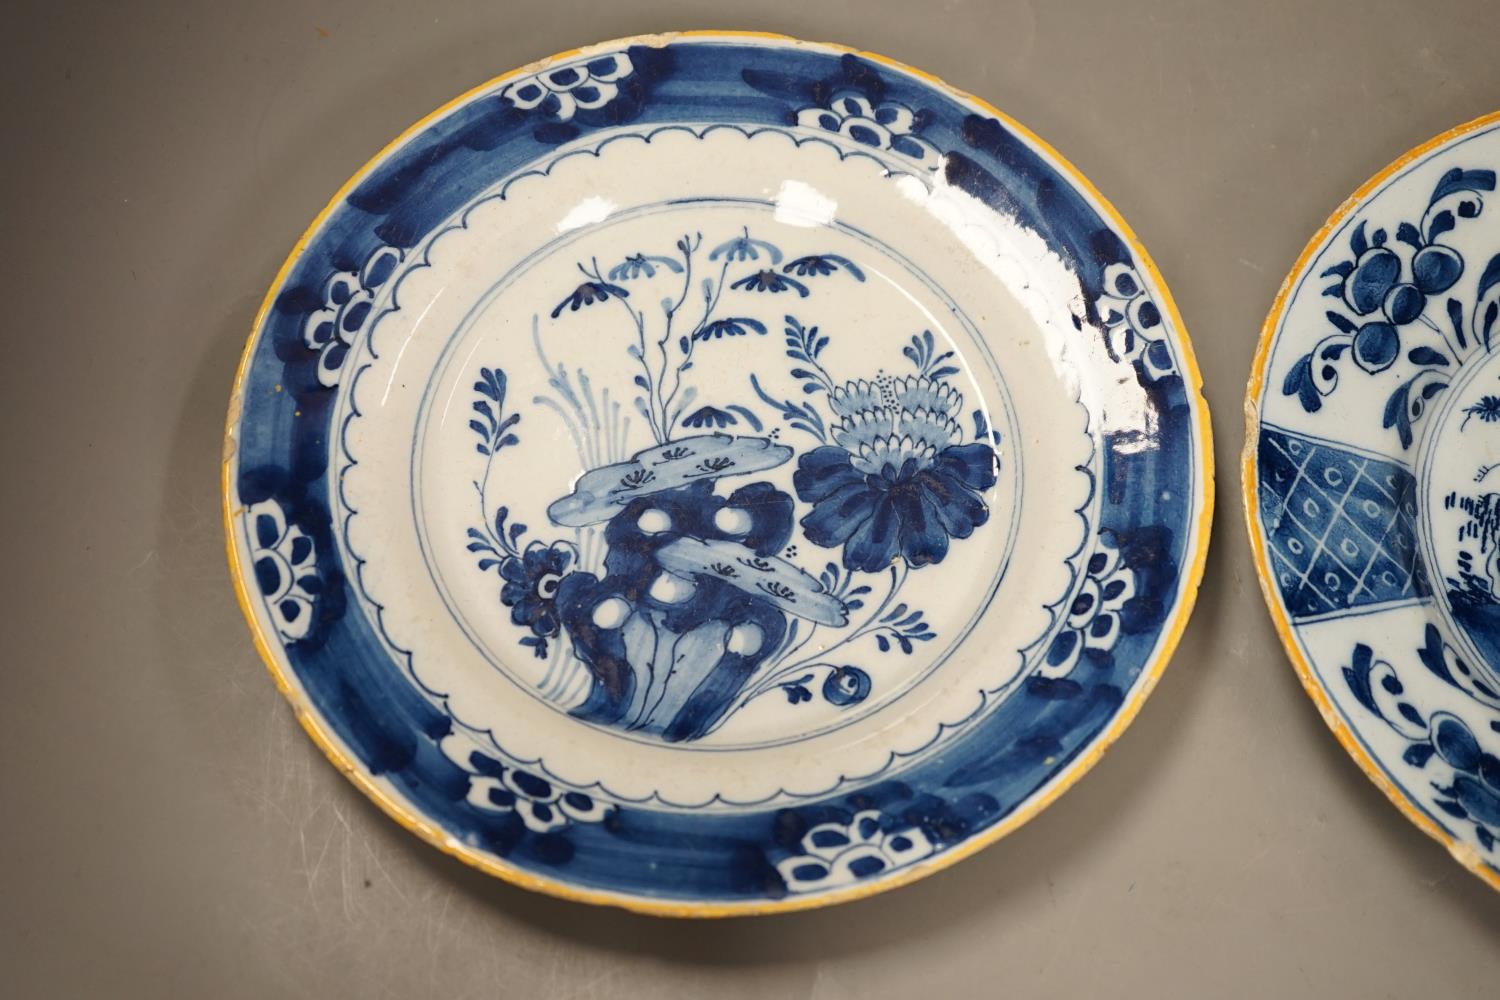 Two 18th century Dutch Delft blue and white plates, largest 23cms diameter - Image 2 of 6